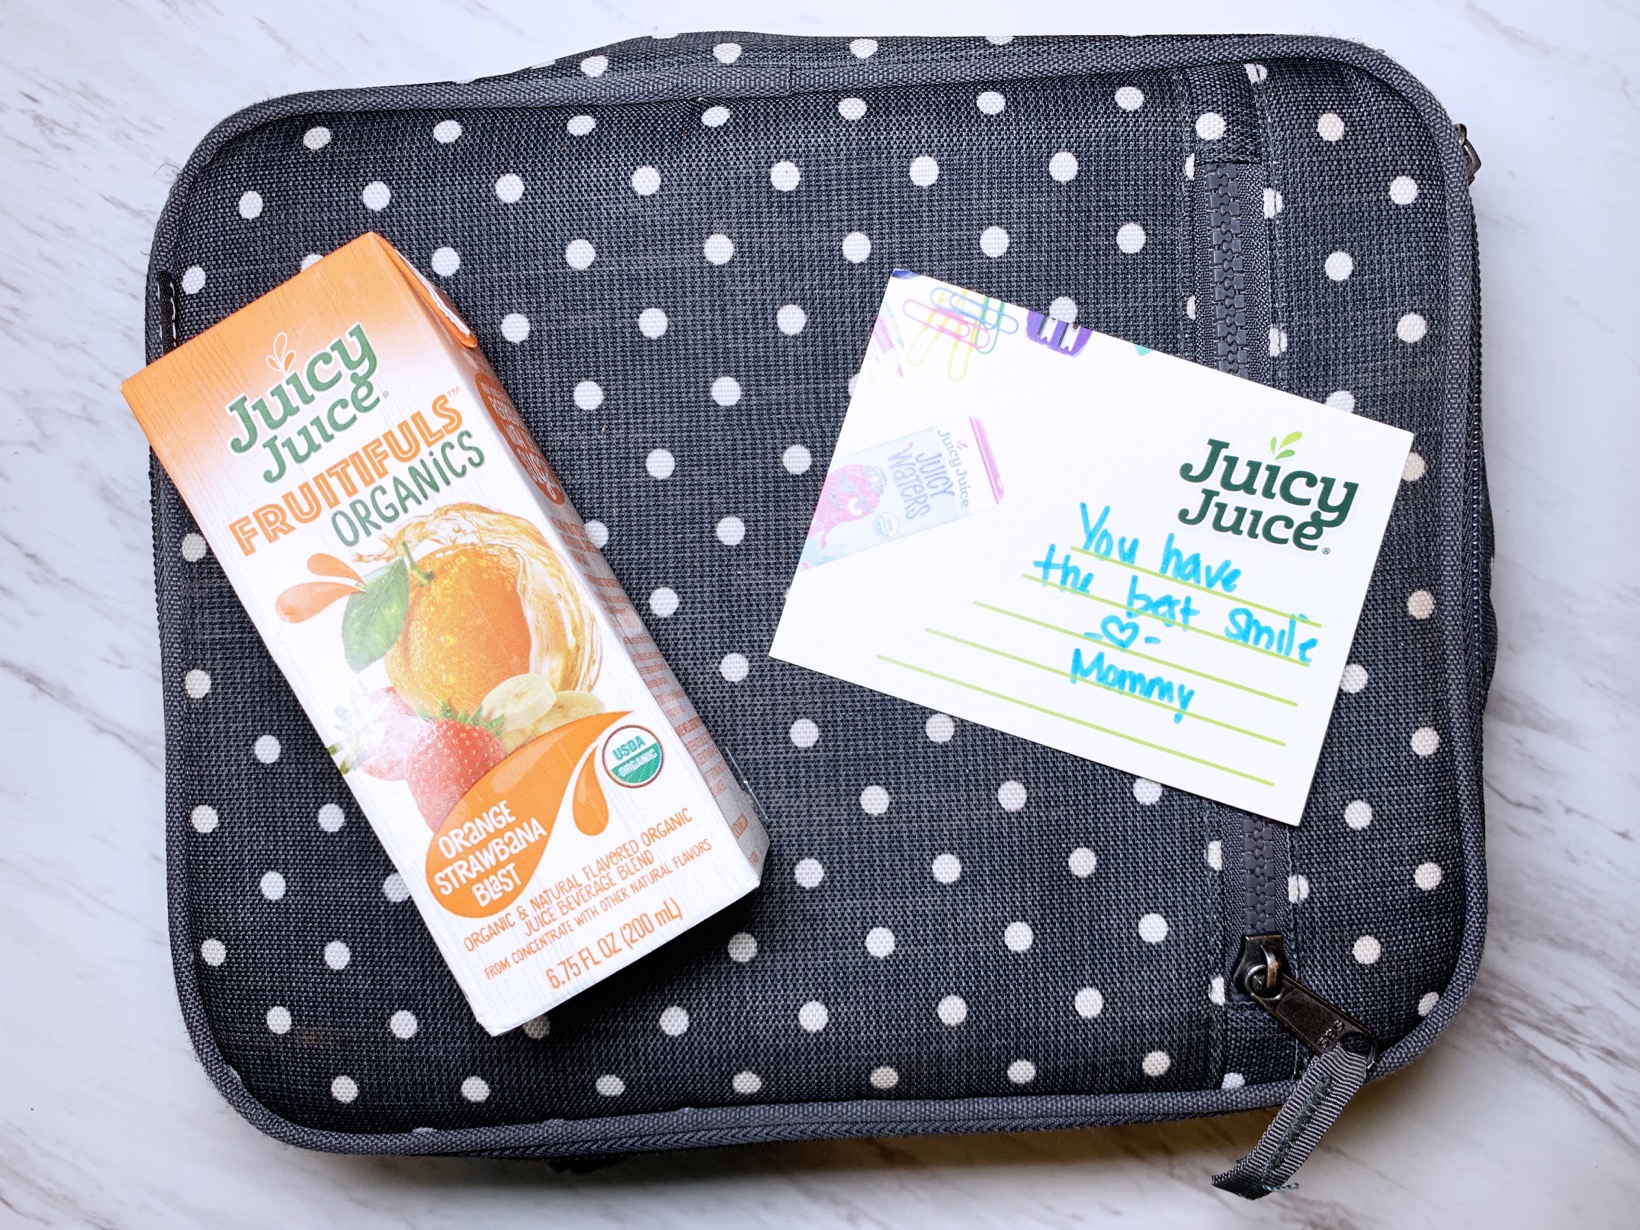 Juicy Juice Fruitifuls Organic and Lunch Notes